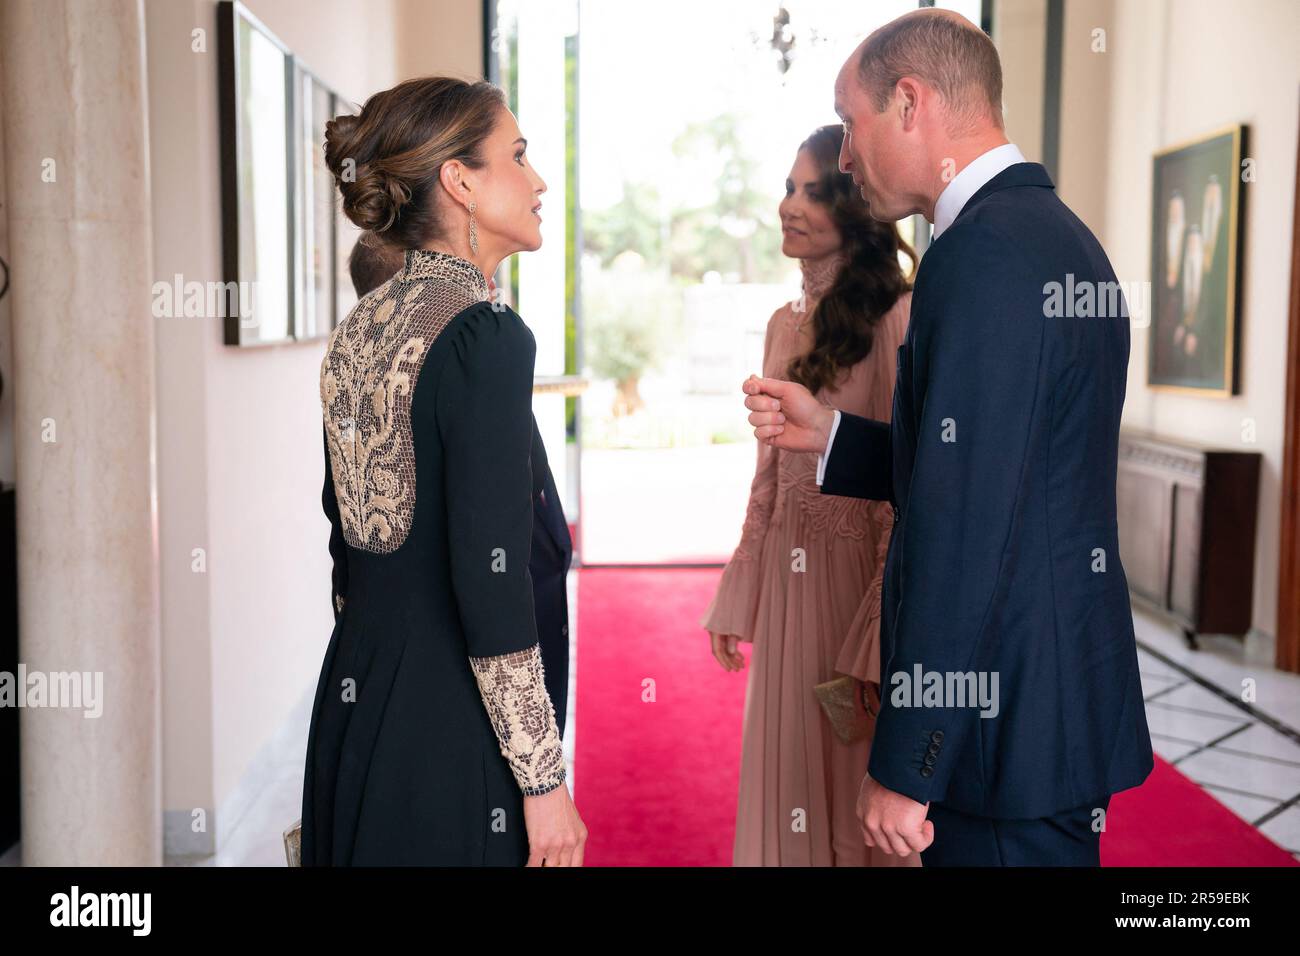 Amman, Jordan. 01st June, 2023. The Prince and Princess of Wales, William and Kate, talk with Jordan's Queen Rania as they attend her son Crown Prince Al Hussein bin Abdullah II and Princess Rajwa al Hussein's wedding at Zahran Palace in Amman, Jordan, on June 1st, 2023. Photo by Balkis Press/ABACAPRESS.COM Credit: Abaca Press/Alamy Live News Stock Photo